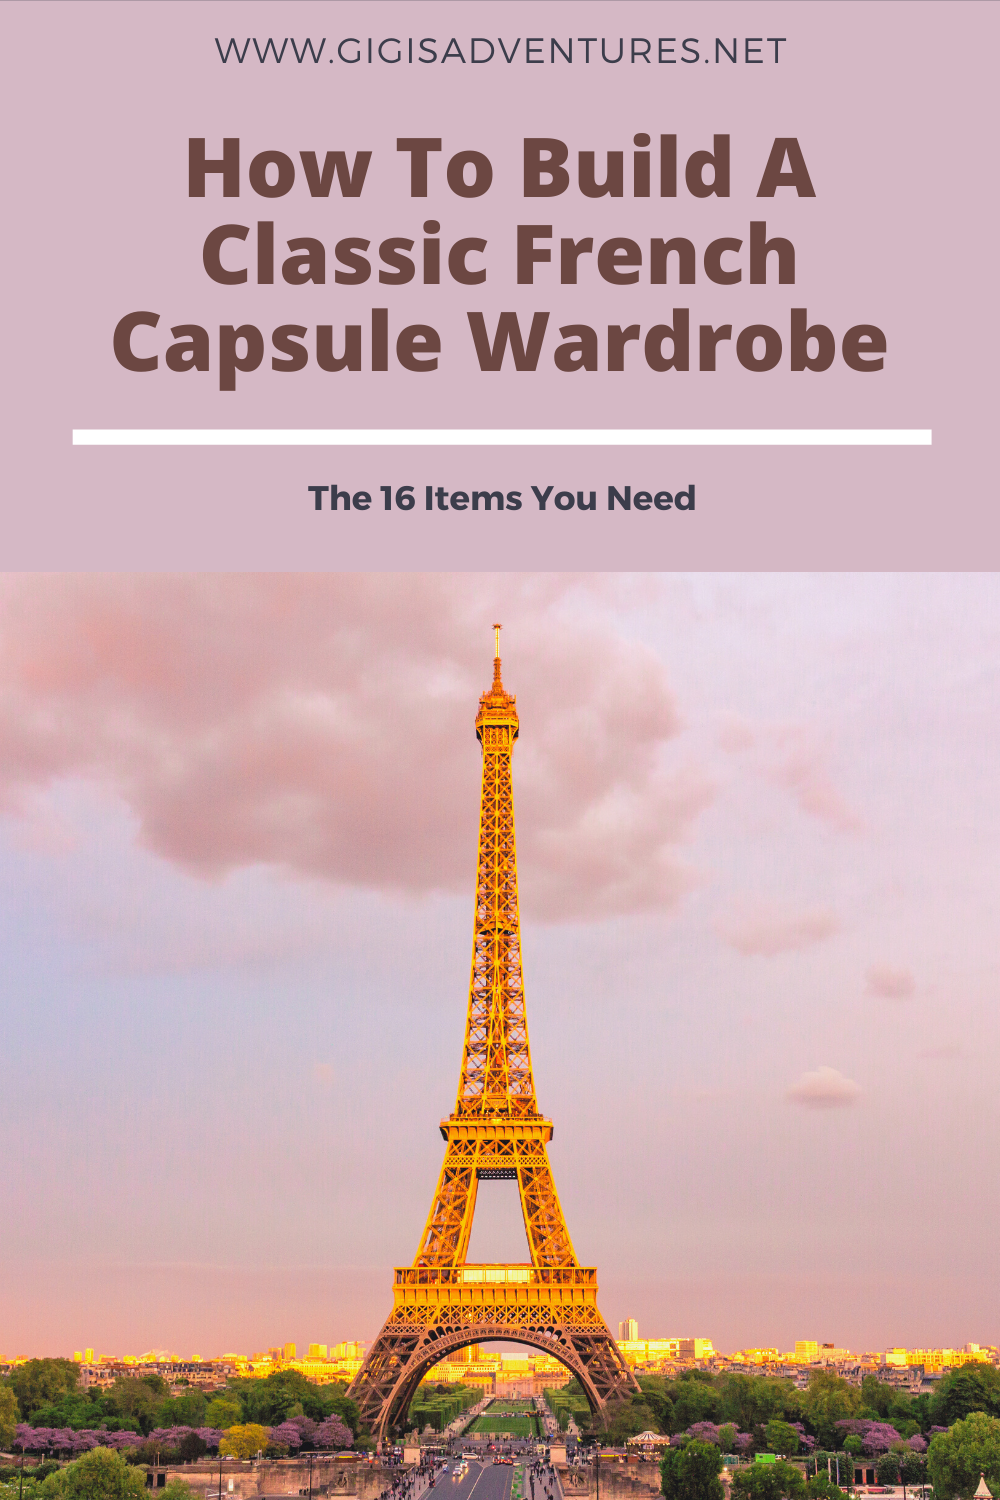 How To Build A Classic French Capsule Wardrobe - The 16 Items You Need